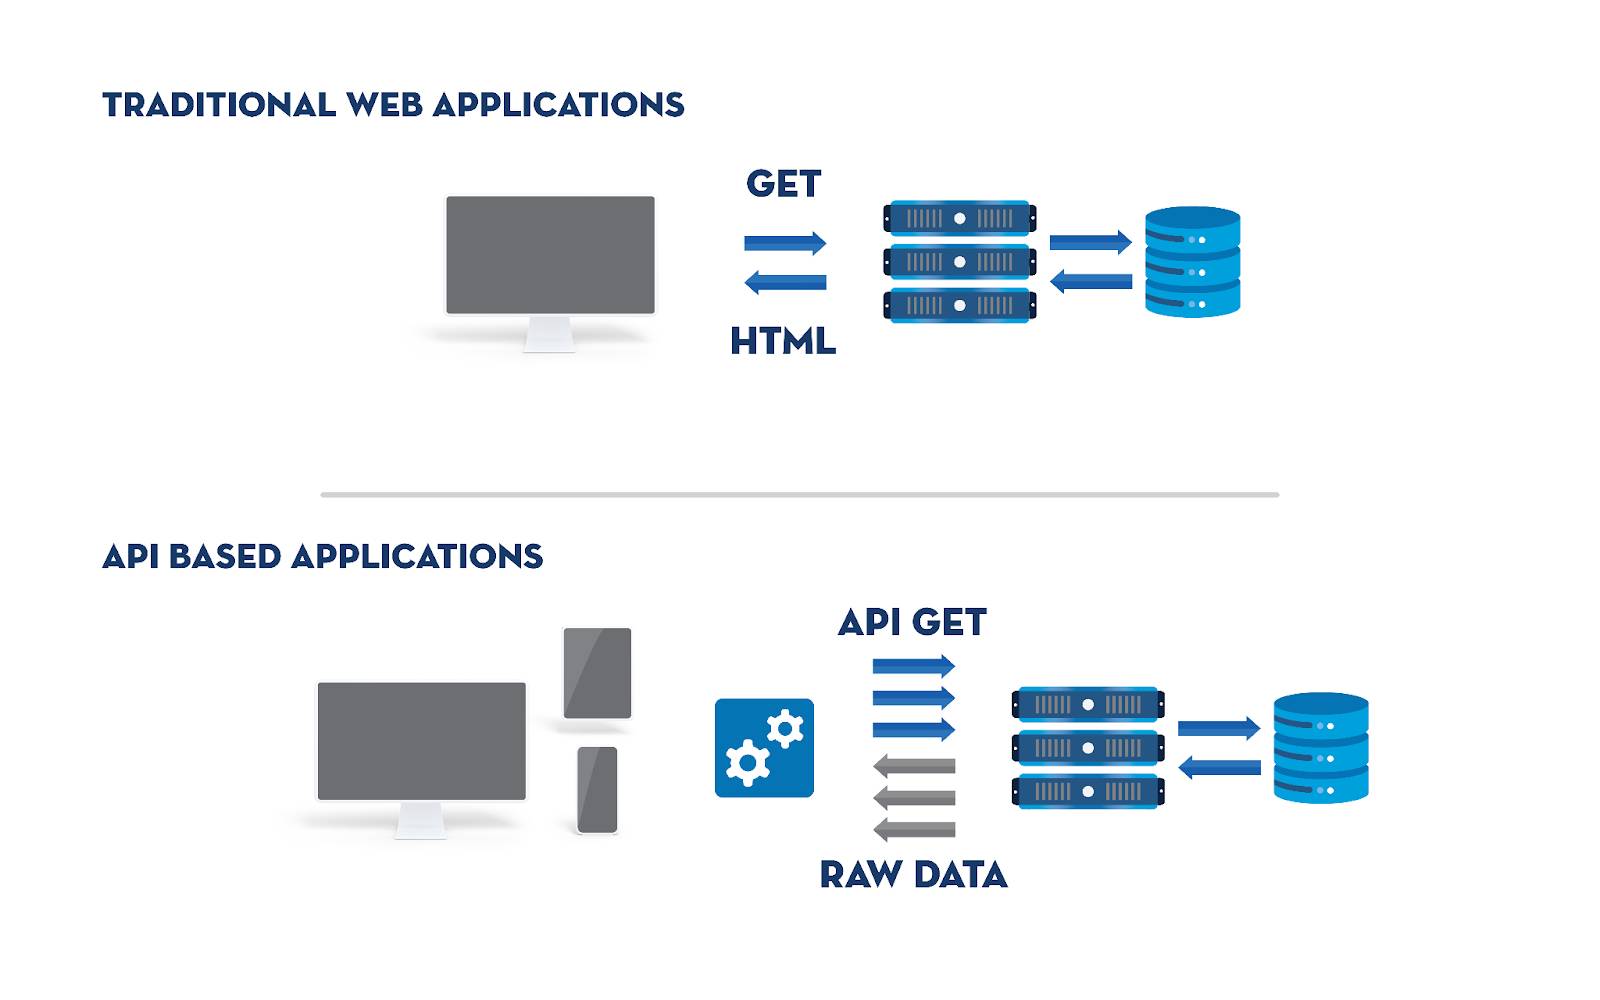 A traditional web application makes a get request to a server, and the browser renders HTML. API-based applications rely on more powerful clients to process raw data.